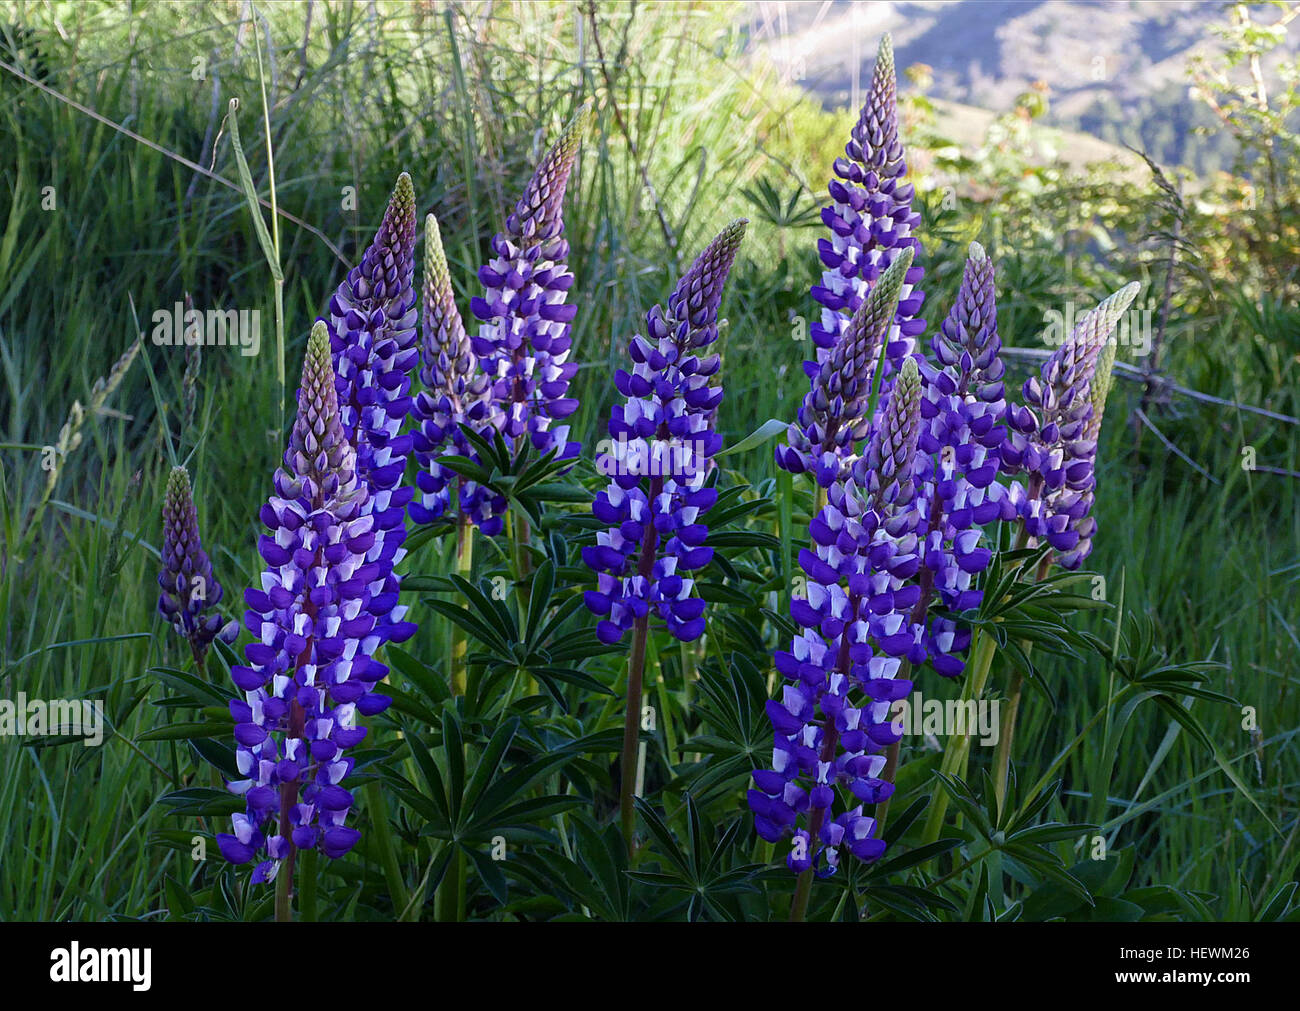 In some parts of New Zealand there are large tracts of Russell lupins which grow by the roadsides. Their combinations of blues and pinks are a tourist attraction, and the subject of many bus stops for photographs.  Lupinus polyphyllus (large-leaved lupine, big-leaved lupine, many-leaved lupine[1] or, primarily in cultivation, garden lupin) is a species of lupine (lupin) native to western North America from southern Alaska and British Columbia east to Quebec, and western Wyoming, and south to Utah and California. It commonly grows along streams and creeks, preferring moist habitats. Stock Photo